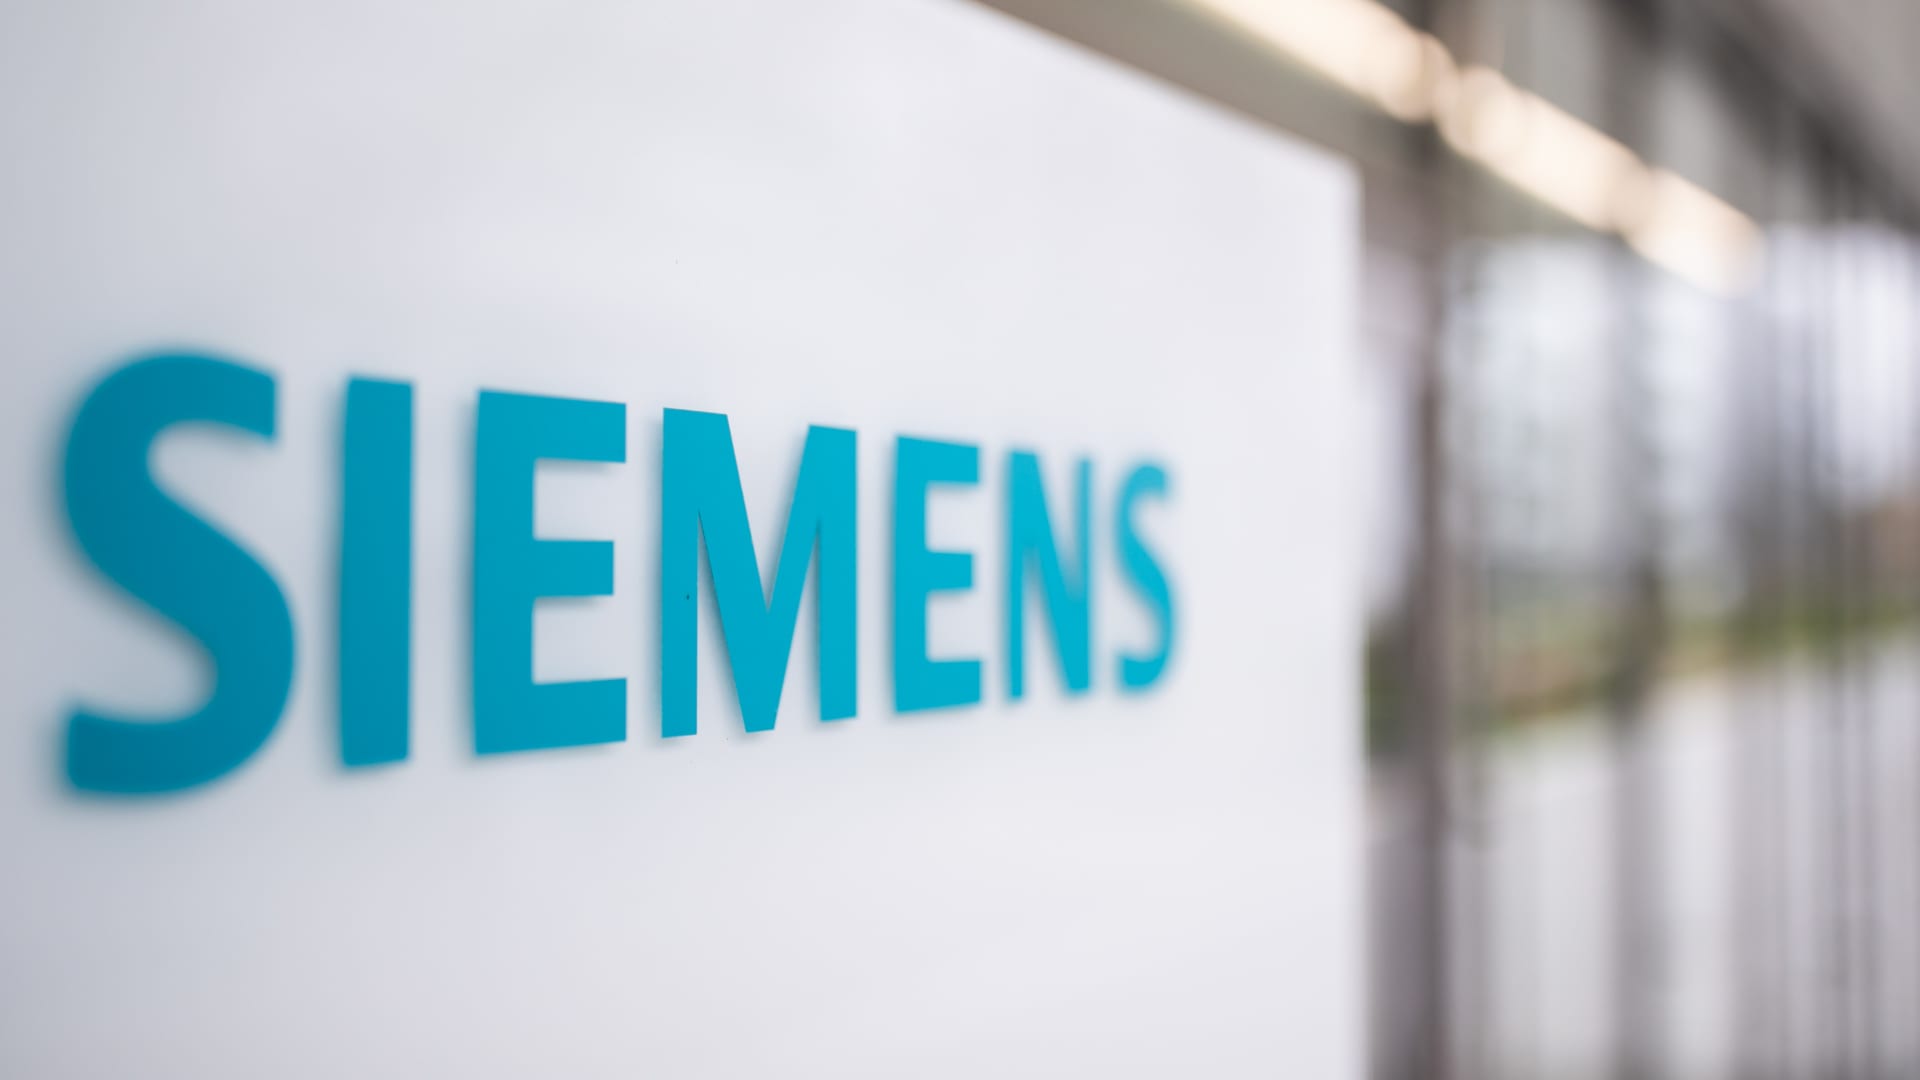 A Siemens logo in Germany. The industrial giant says that a newly commissioned green hydrogen plant in the country will use wind and solar power from the Wunsiedel Energy Park.